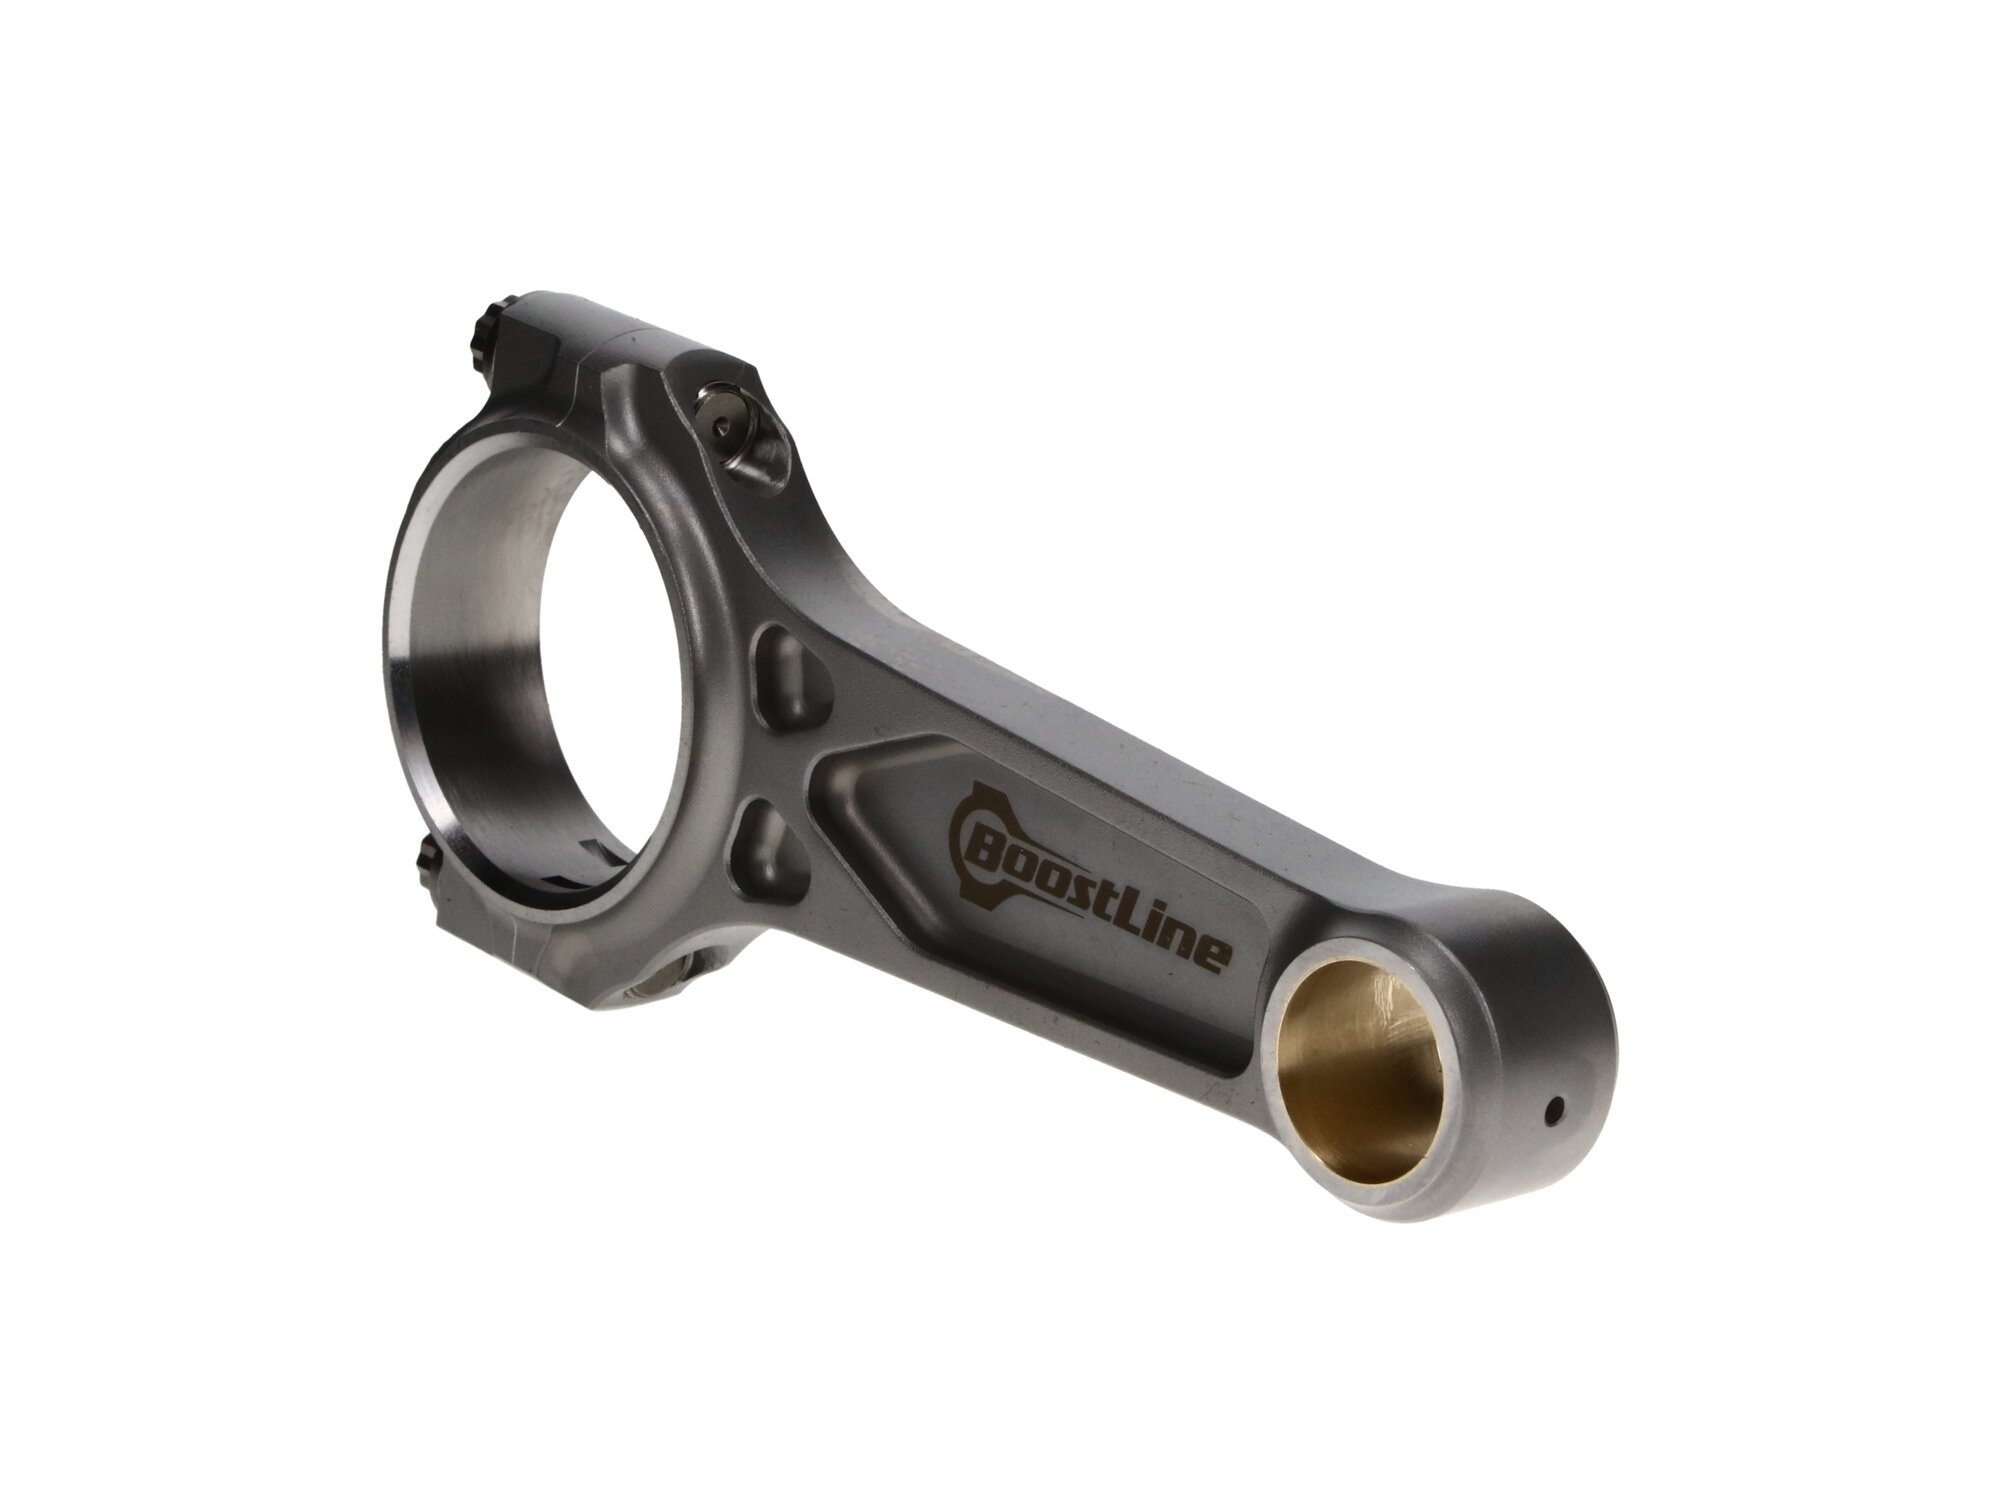 Ford, Small Block Ford, 6.200 in. Length, Connecting Rod Set